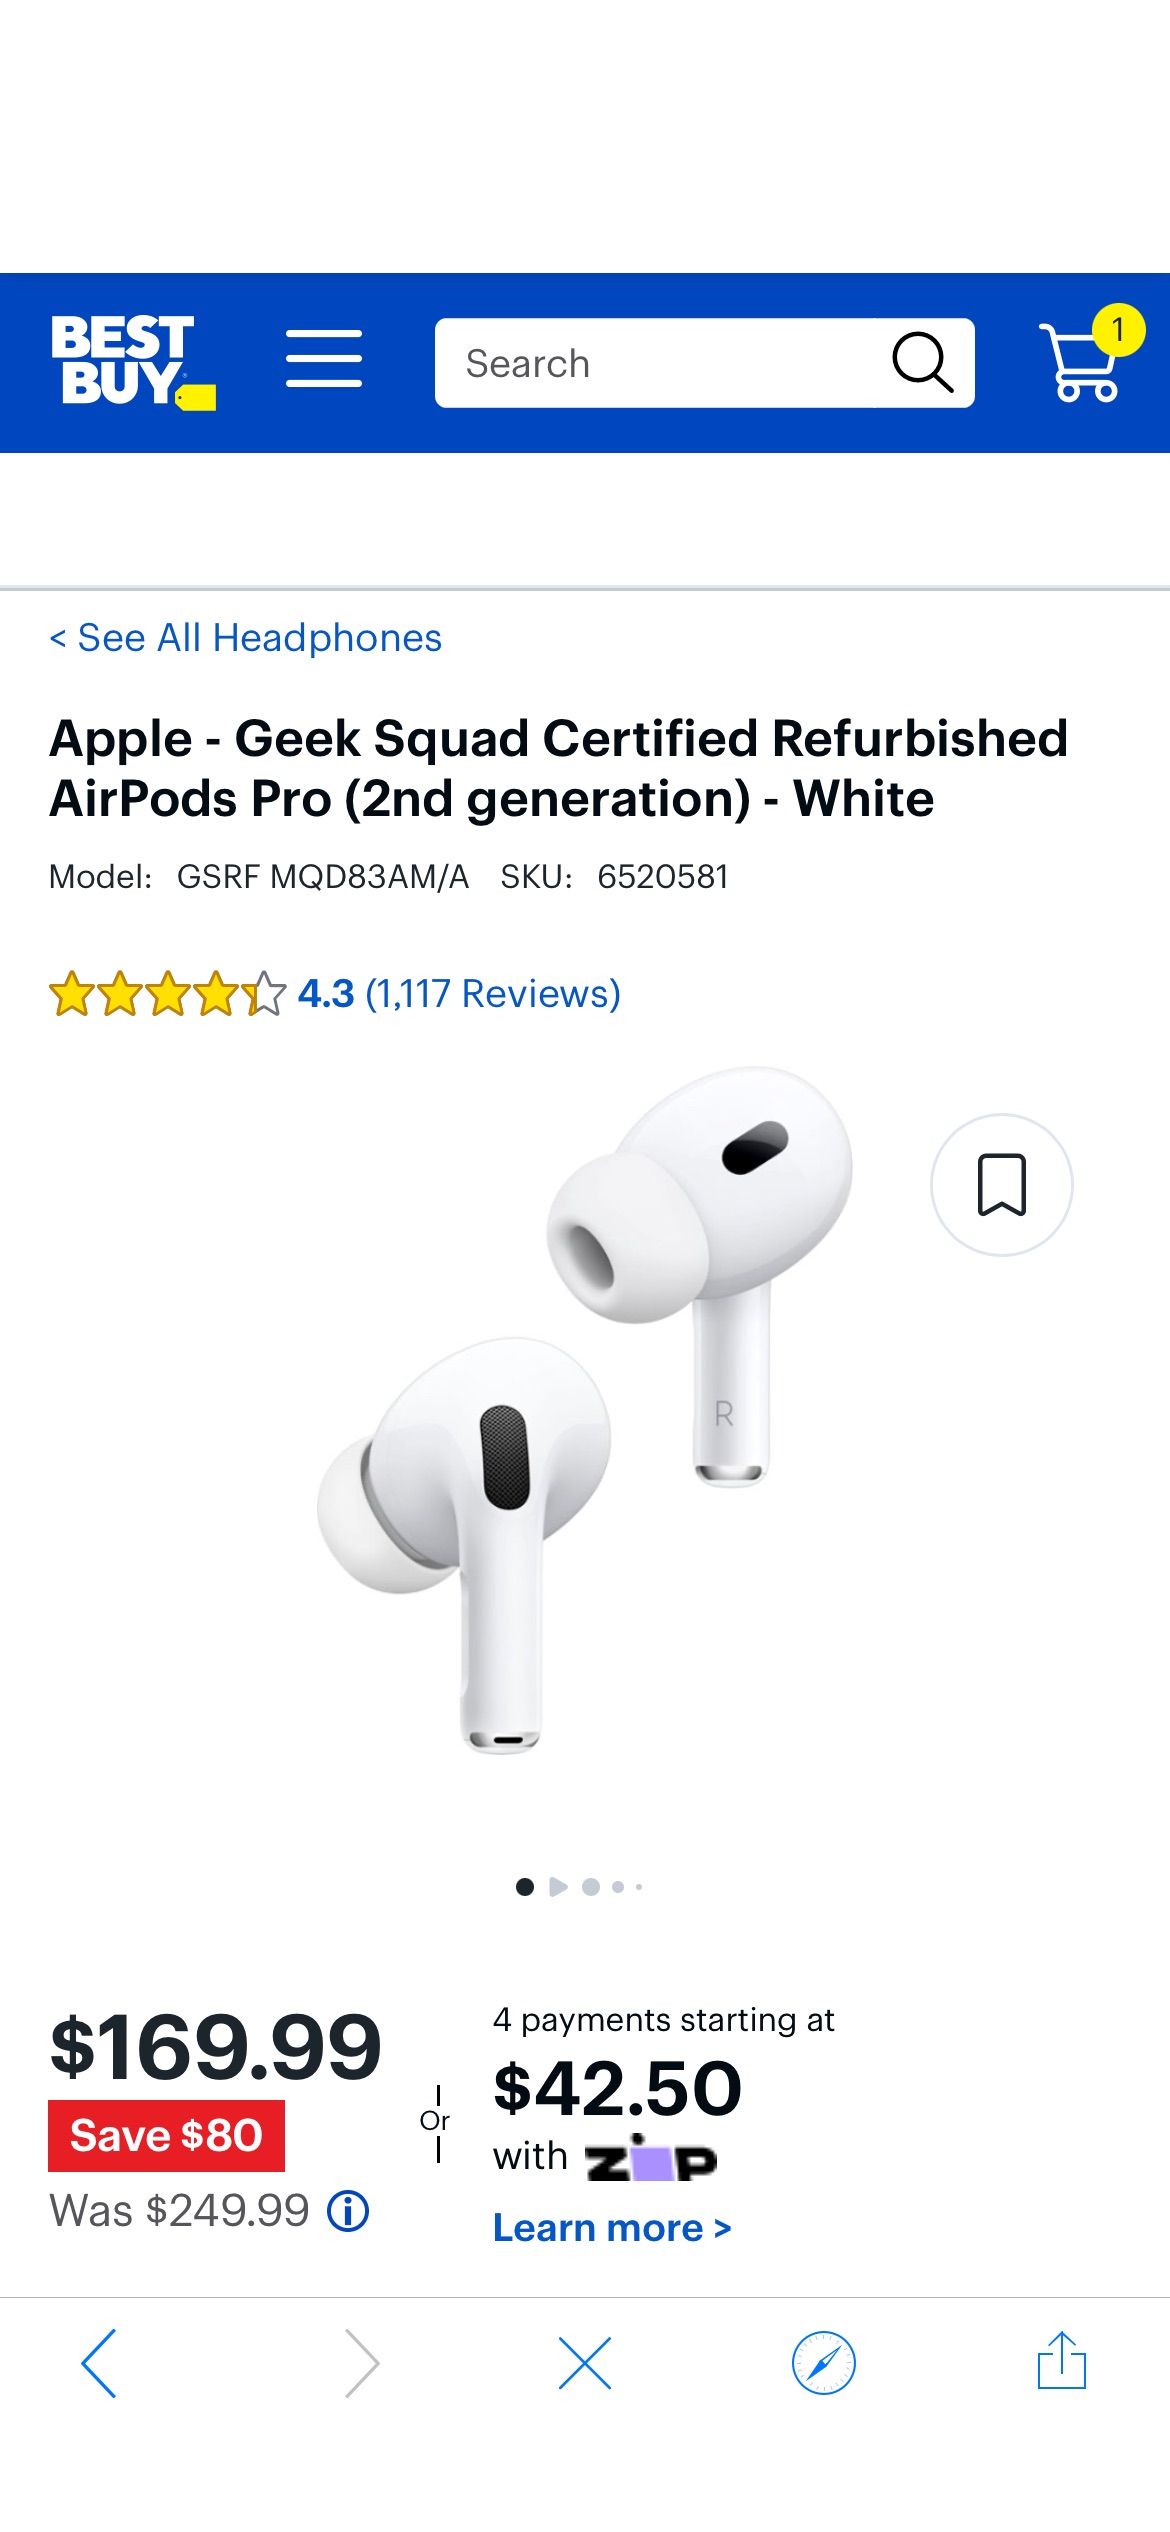 Apple Geek Squad Certified Refurbished AirPods Pro (2nd generation) White GSRF MQD83AM/A - Best Buy